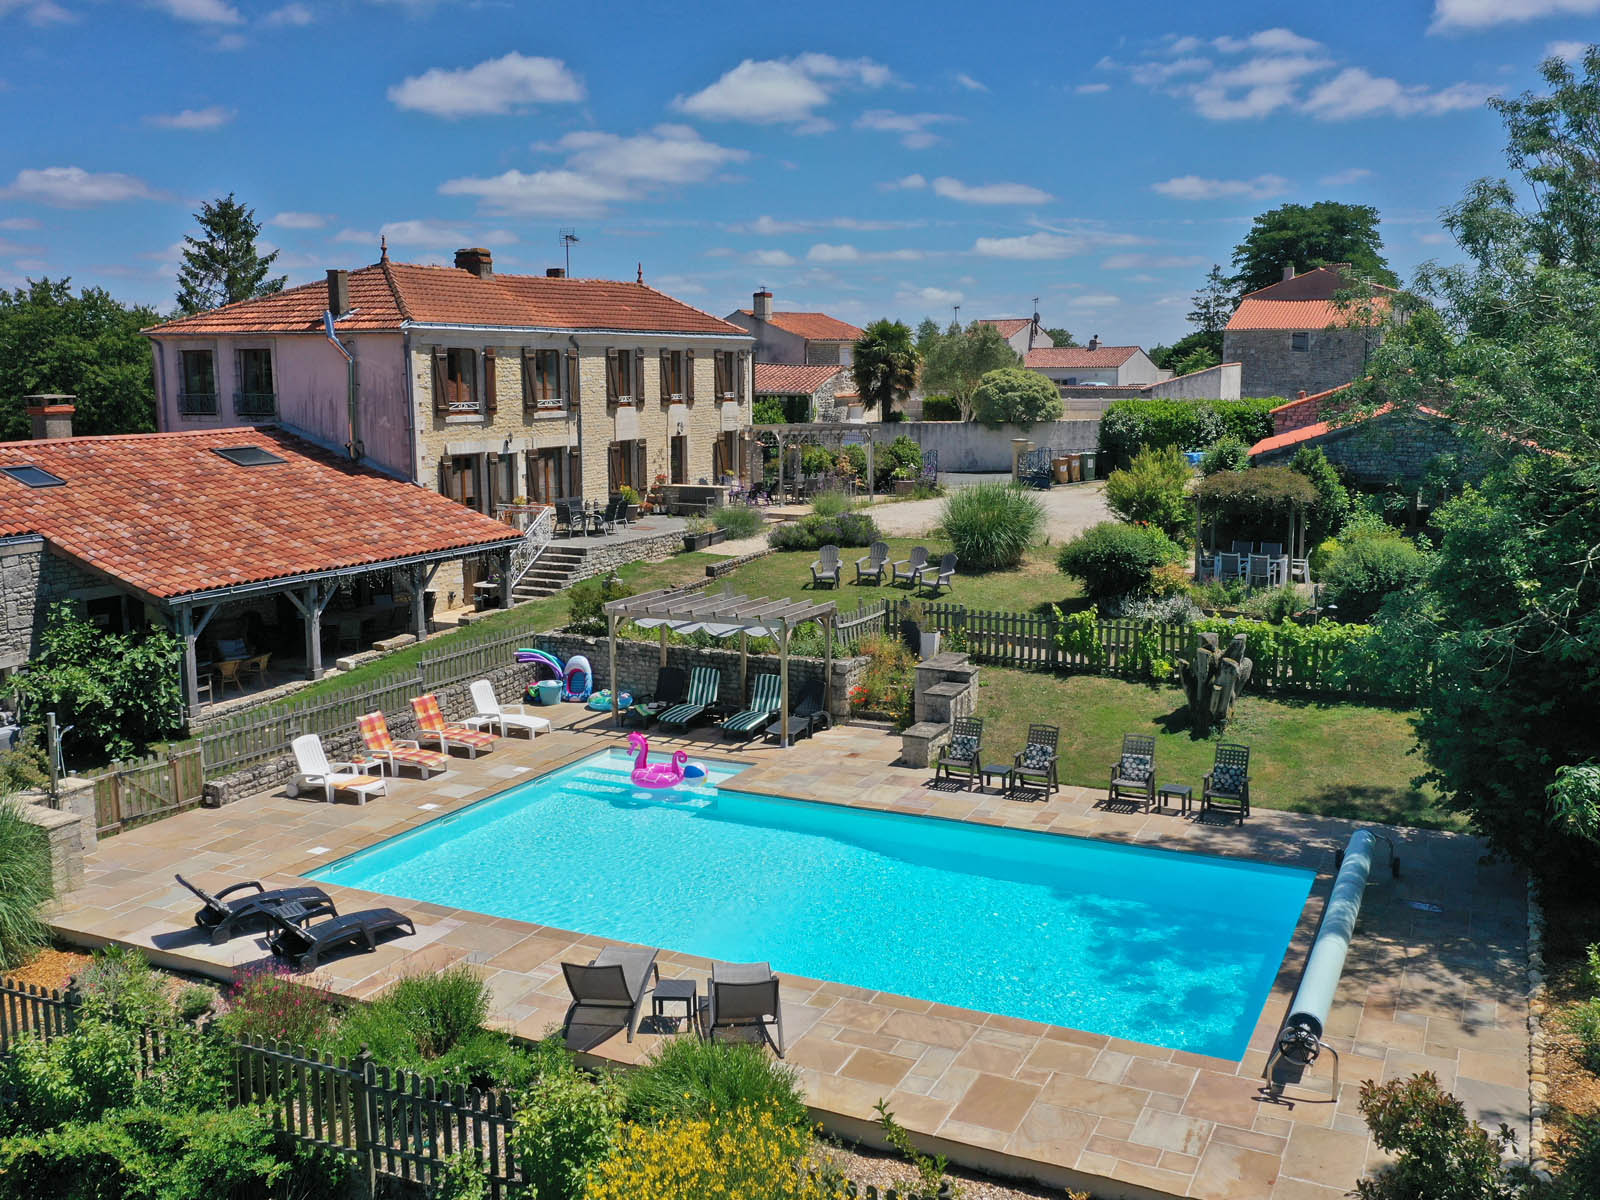 Maison Lairoux Holiday Cottages in the Vendee